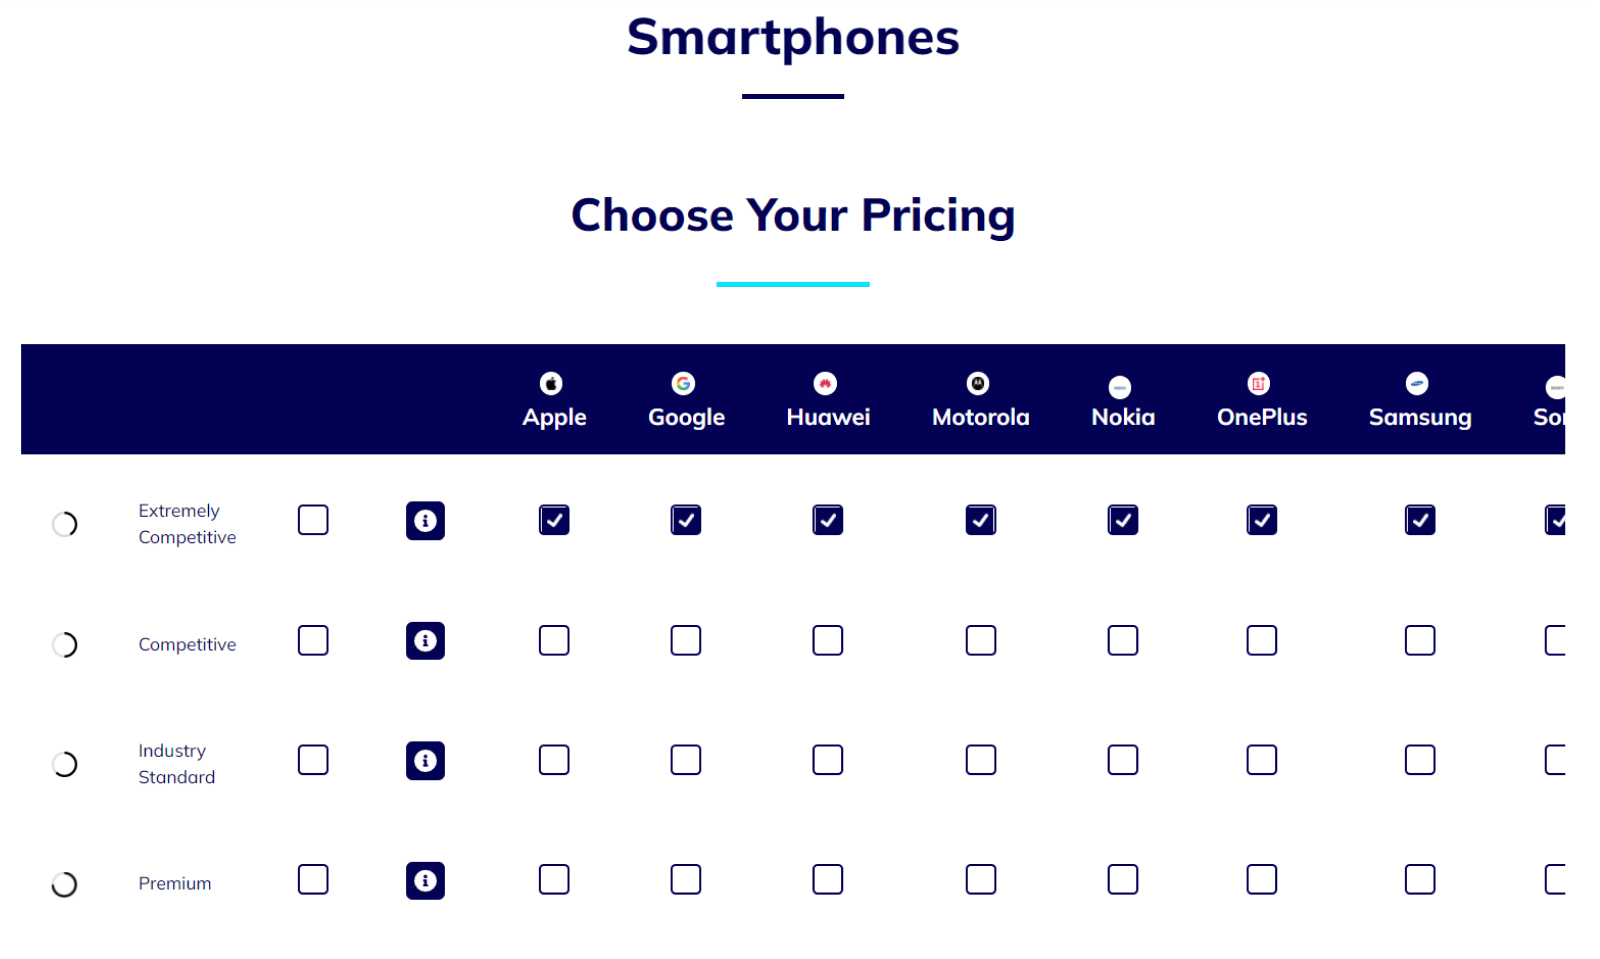 Select Your Device Manufacturer